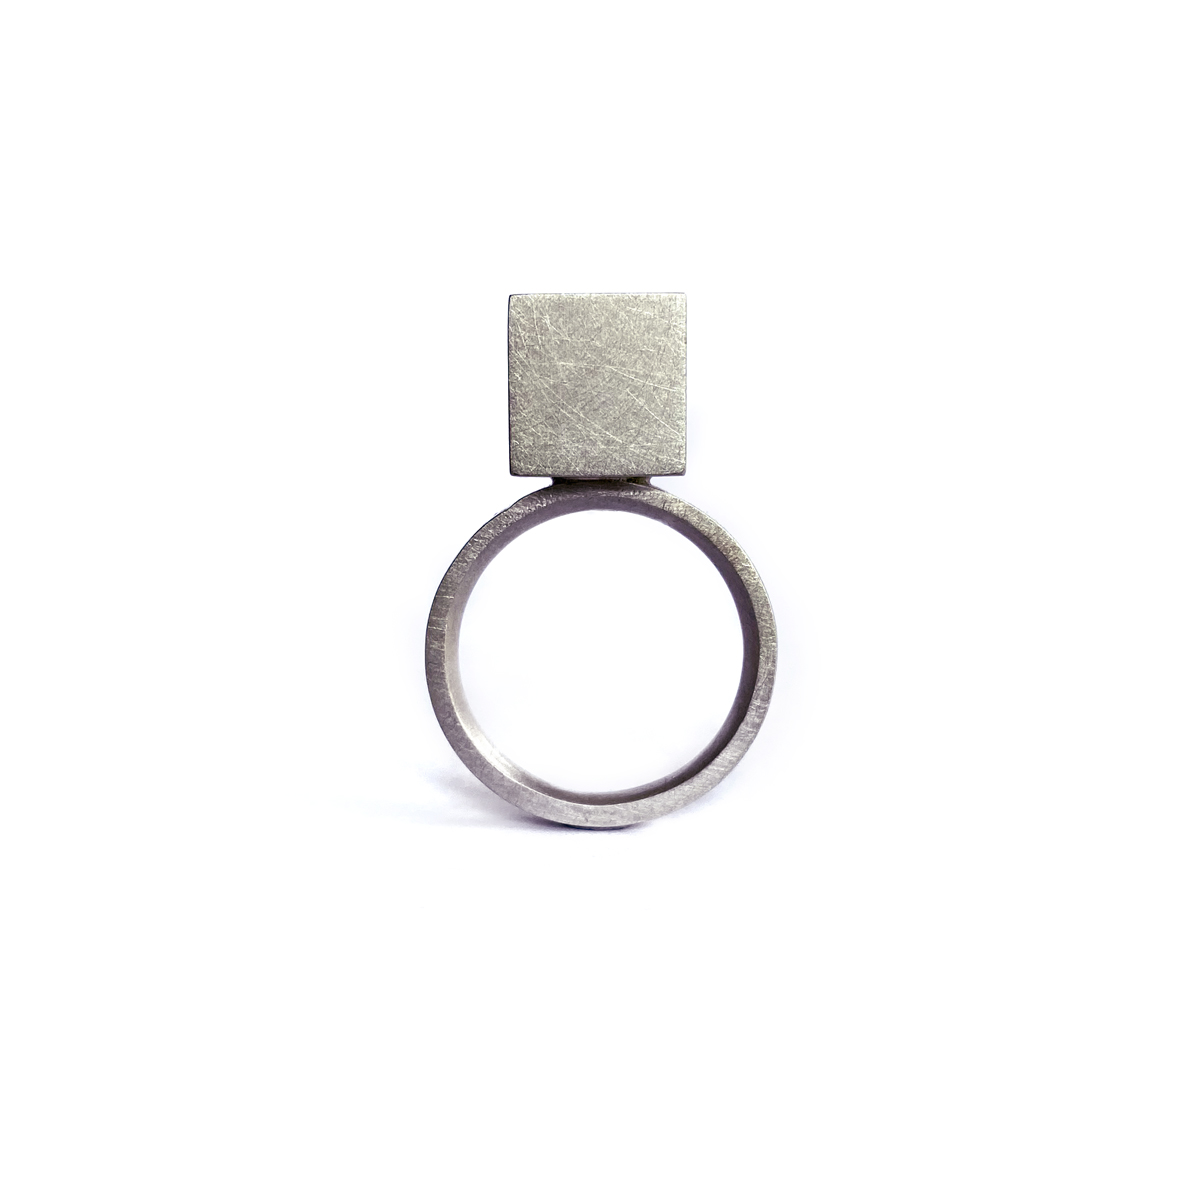 Four Corners Ring, sterling silver, 2020, Kate Alterio